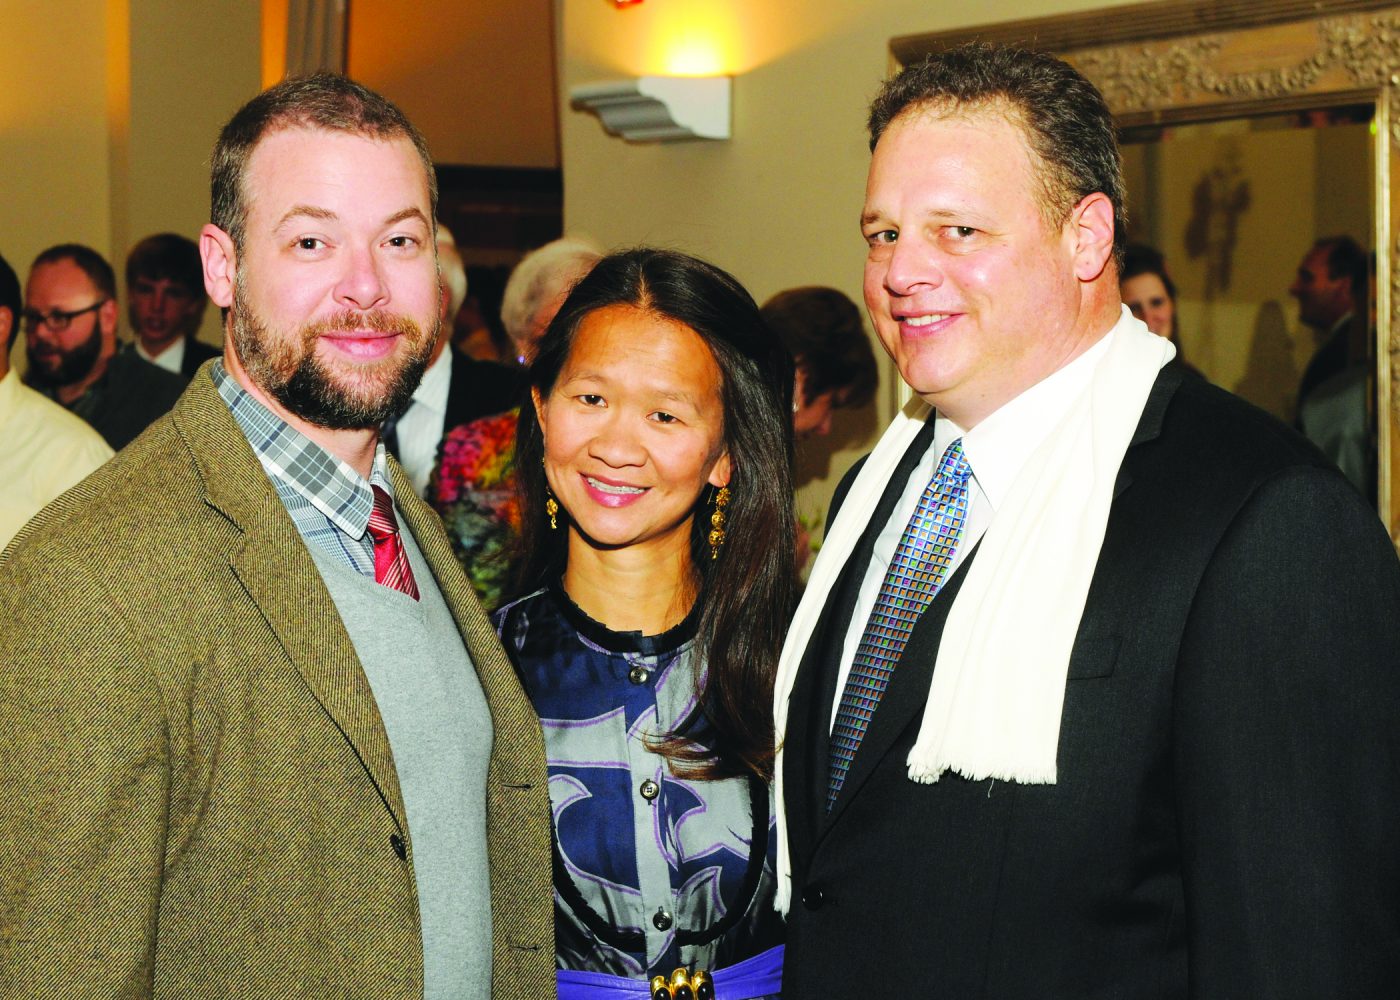 Trinh Huynh stands at mock trial fundraising event with the two other coaches, Brian Leah and Carol Gebo. Huynh was a coach of the team for 11 years.